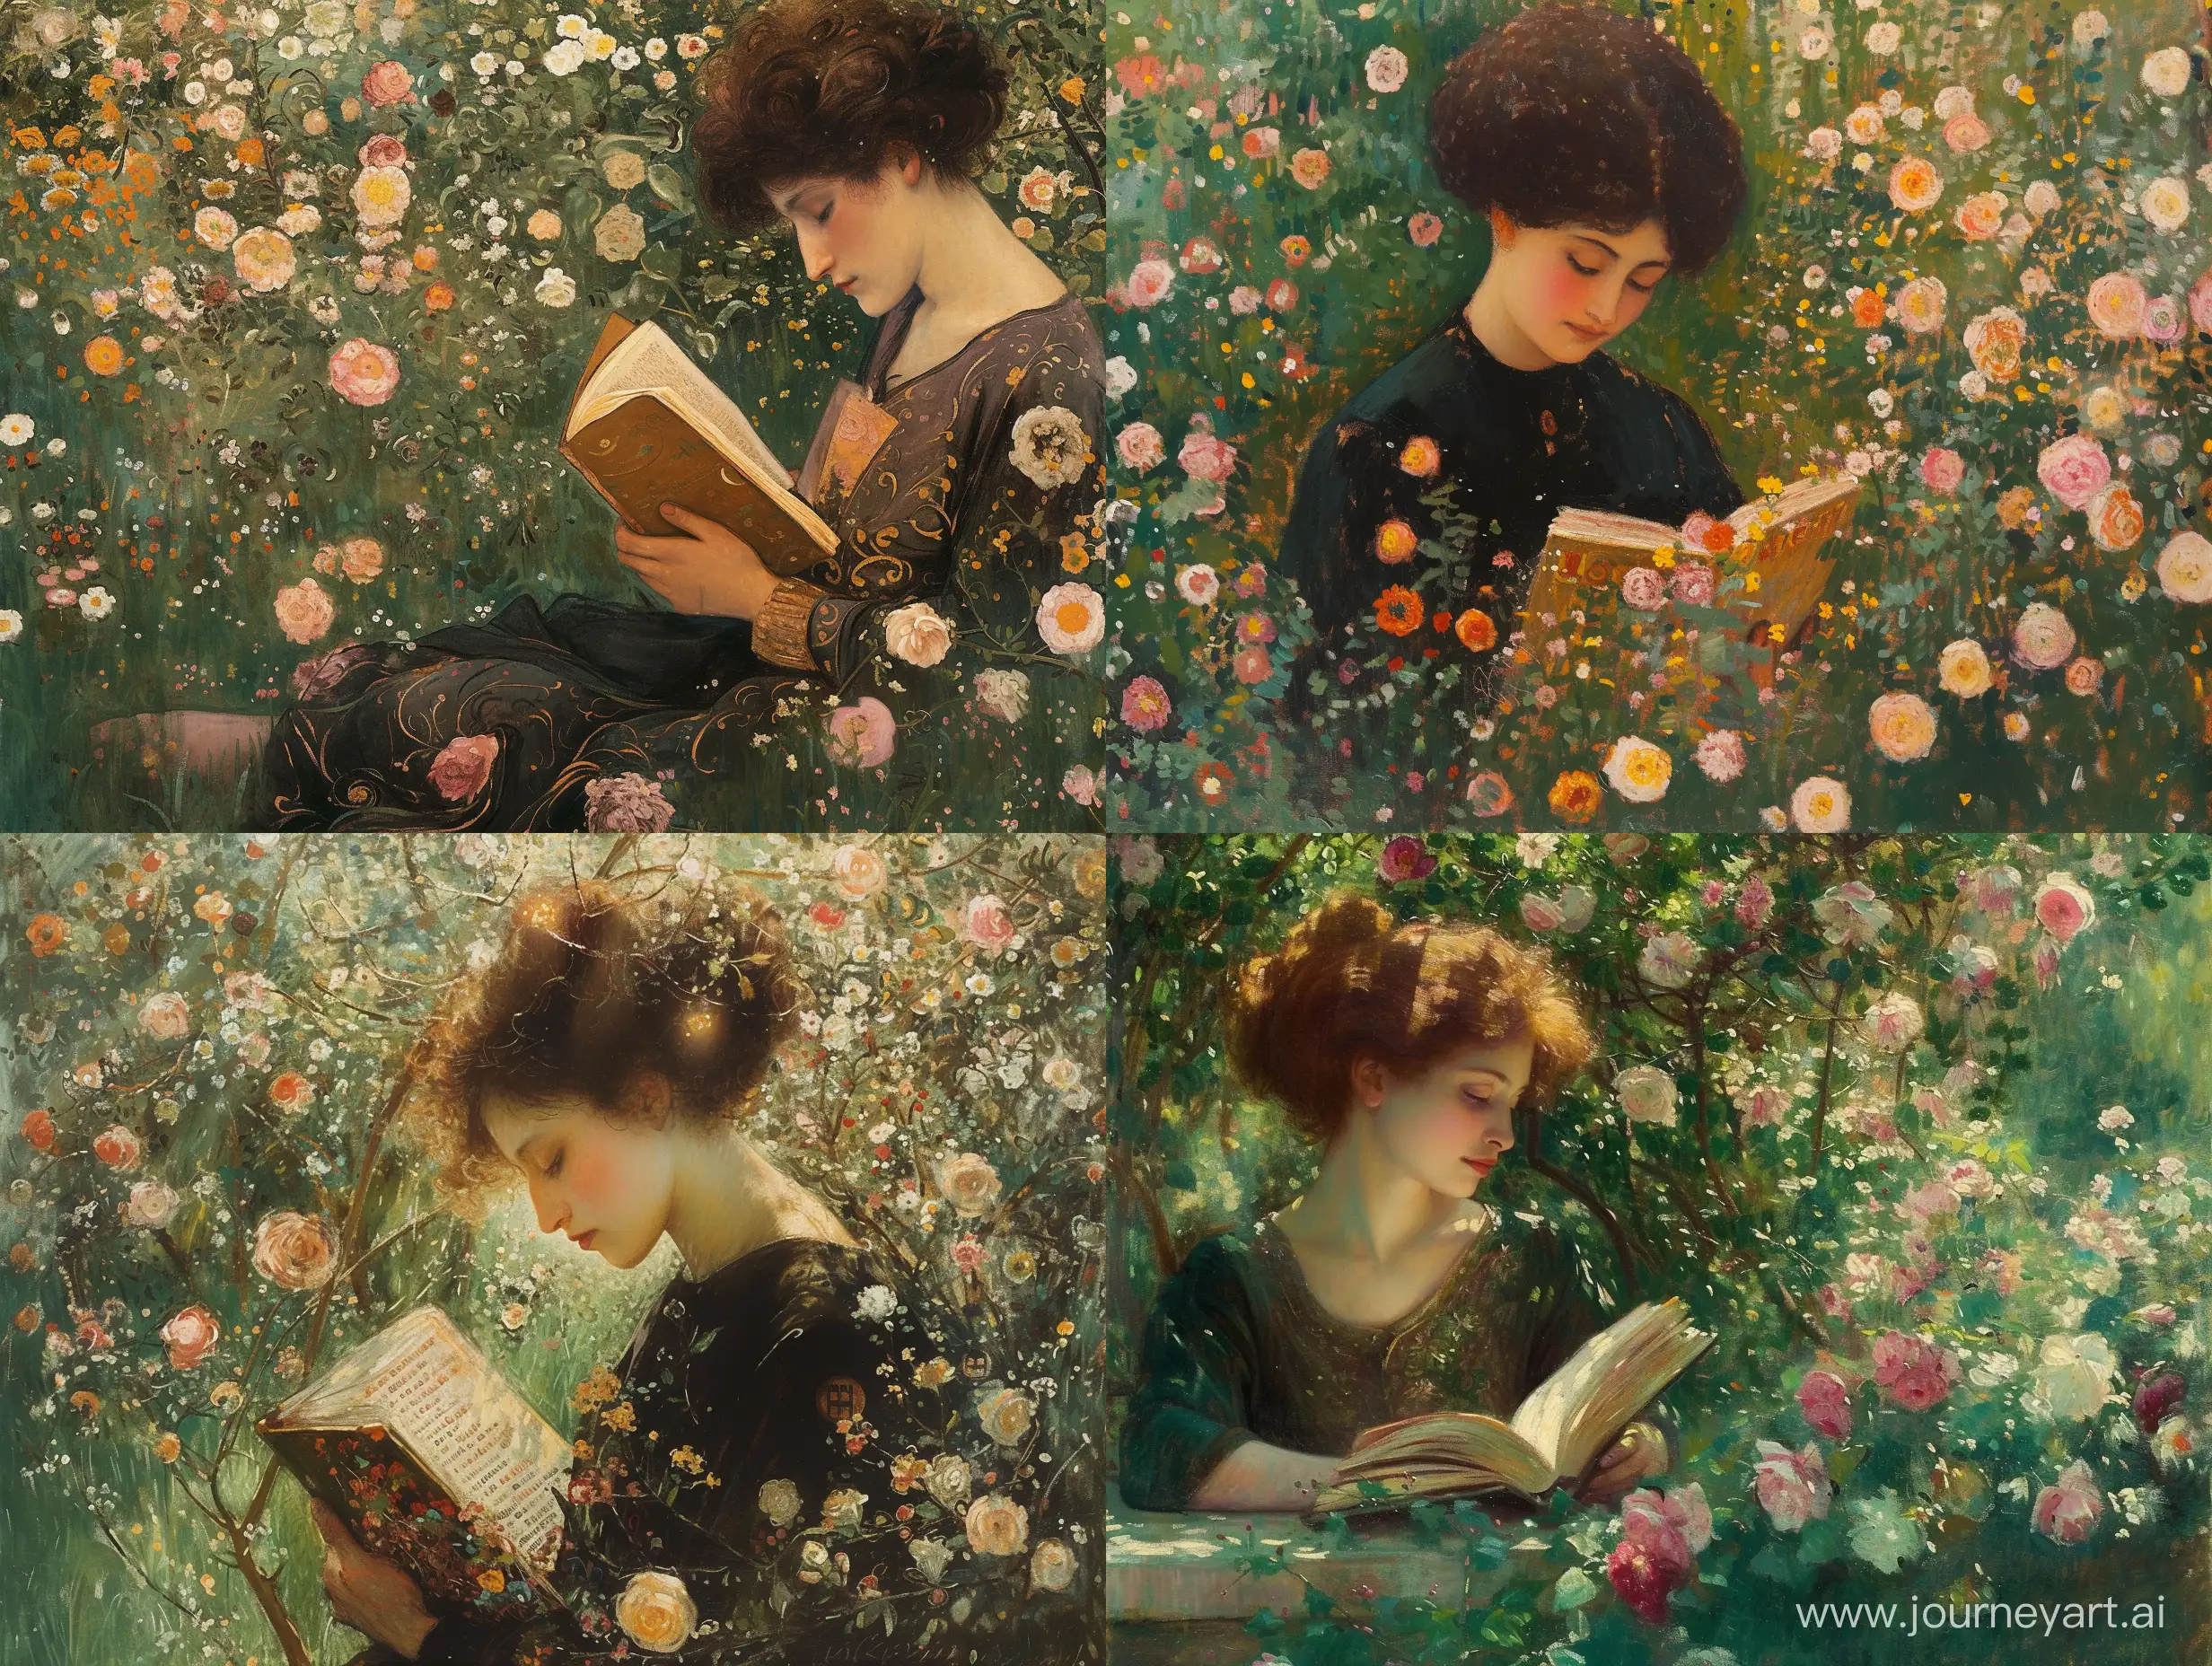 Tranquil-Woman-Reading-in-Sunlit-Garden-Amid-Blossoming-Flowers-by-Gustav-Klimt